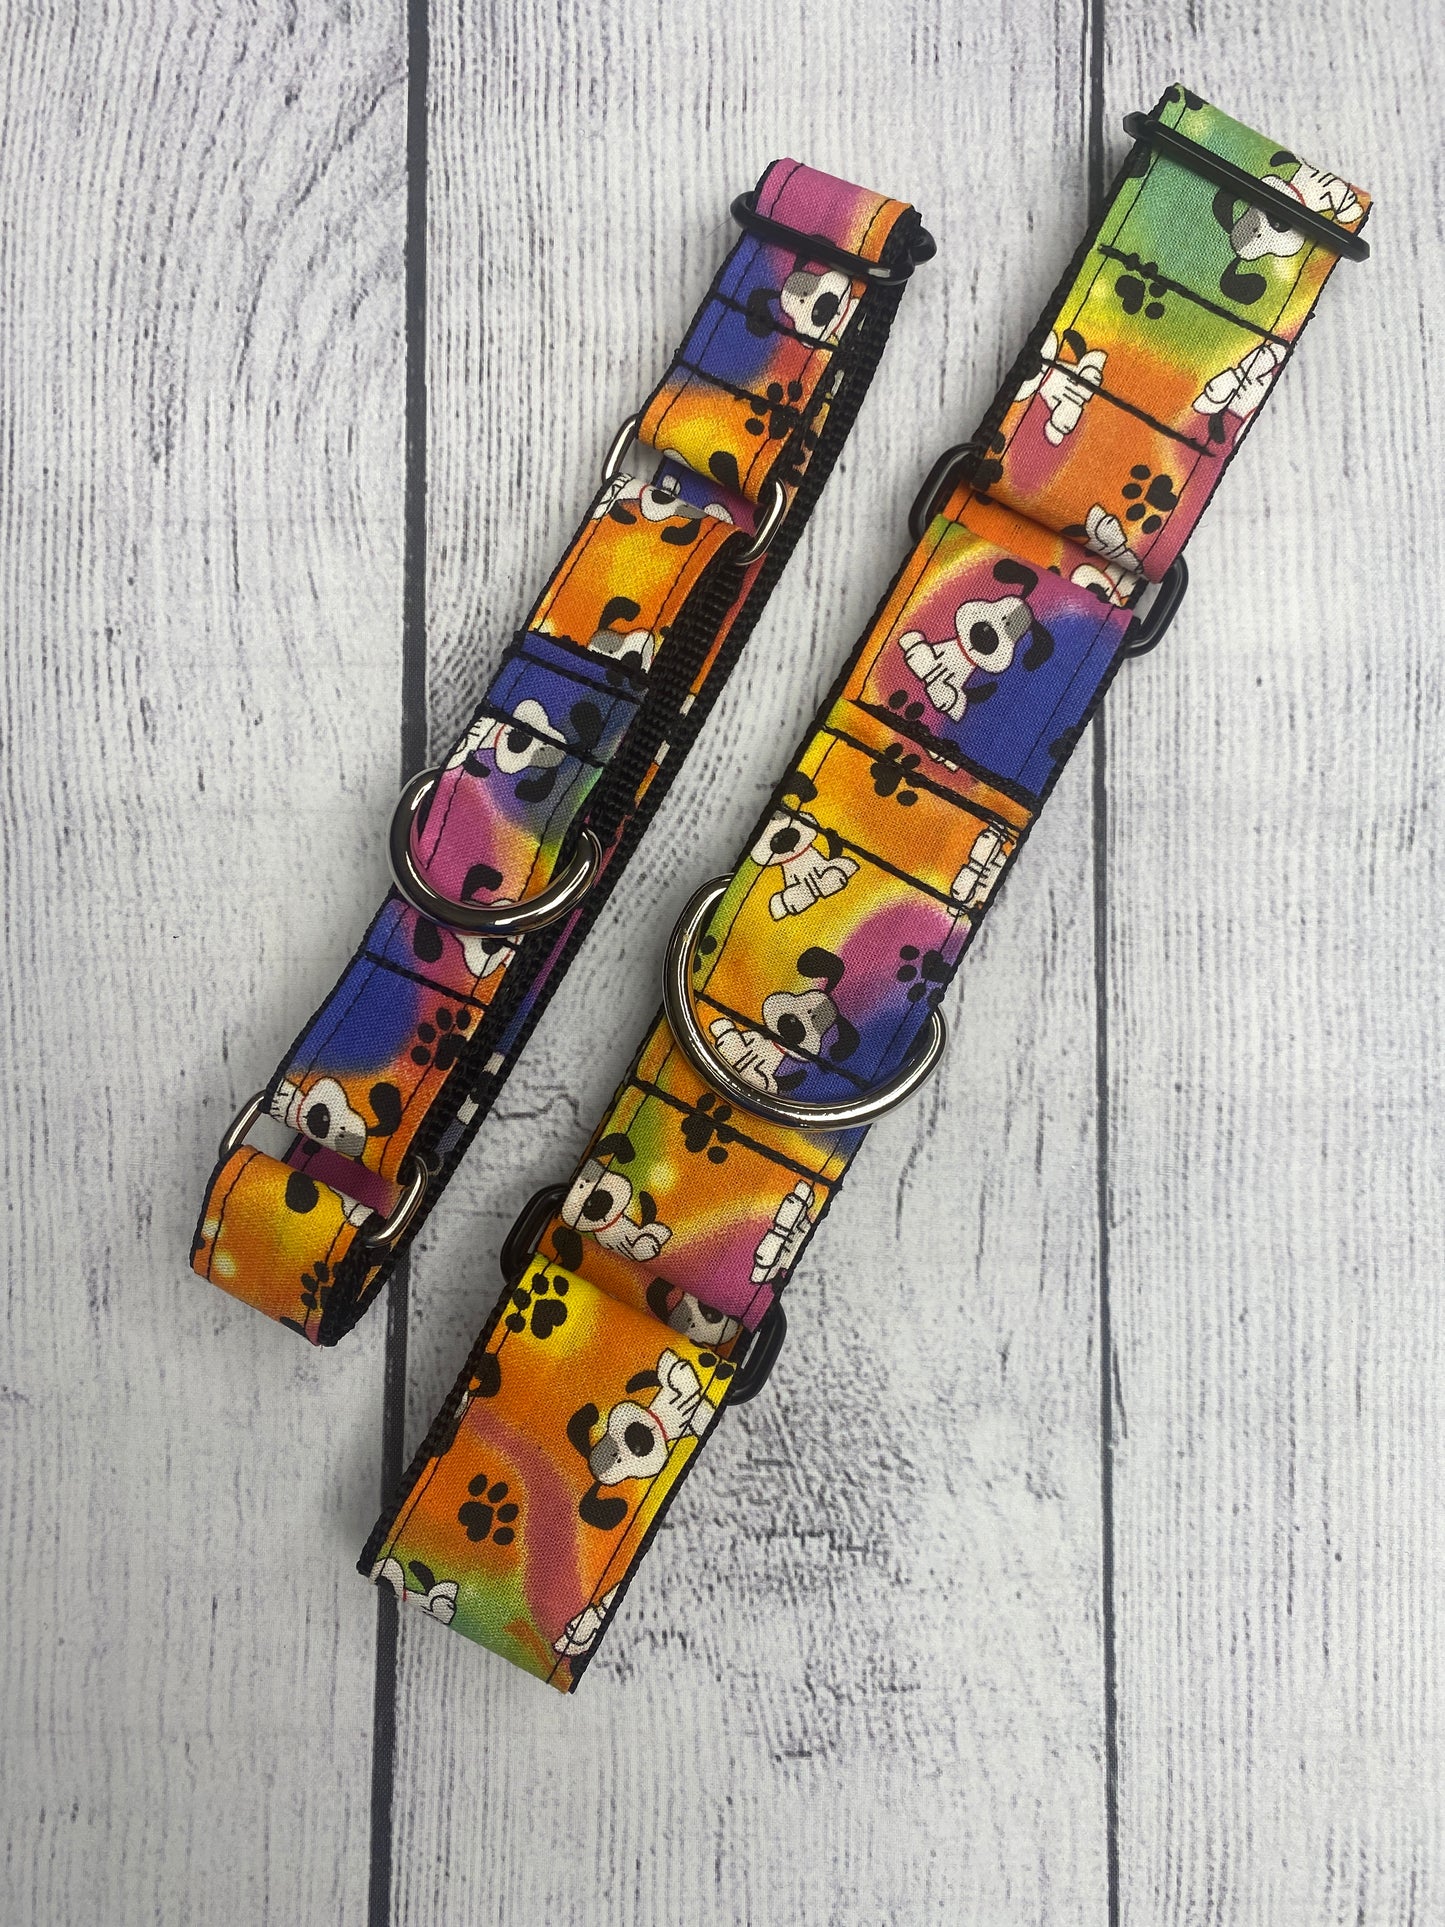 Color Doggy Print Martingale